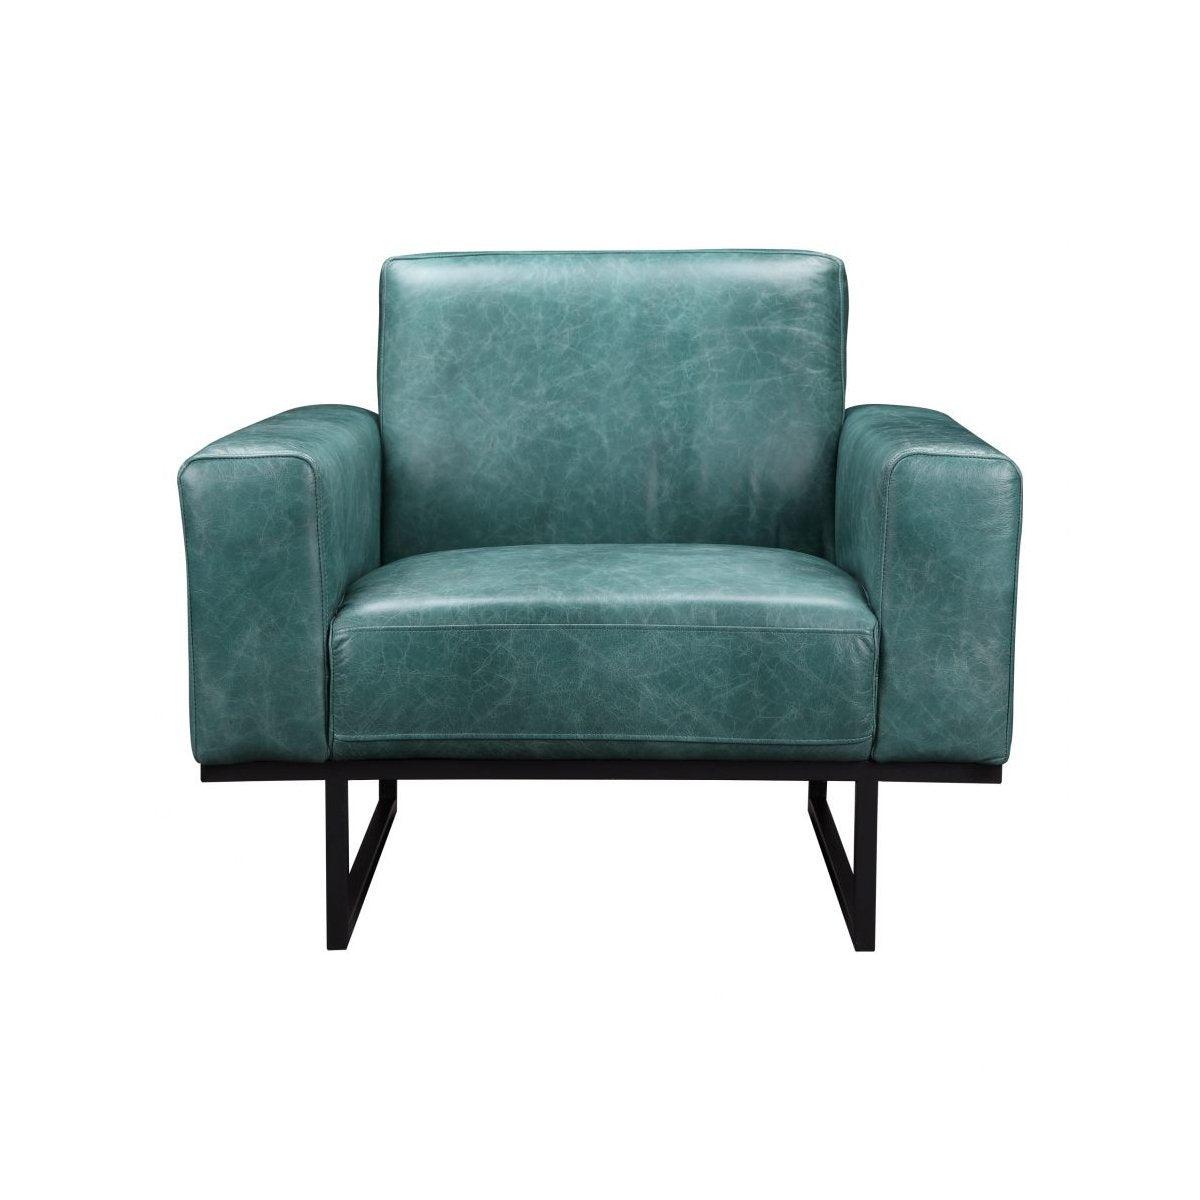 Load image into Gallery viewer, Brock Arm Chair Occasional Chairs Moe&amp;#39;s     Four Hands, Burke Decor, Mid Century Modern Furniture, Old Bones Furniture Company, Old Bones Co, Modern Mid Century, Designer Furniture, https://www.oldbonesco.com/
